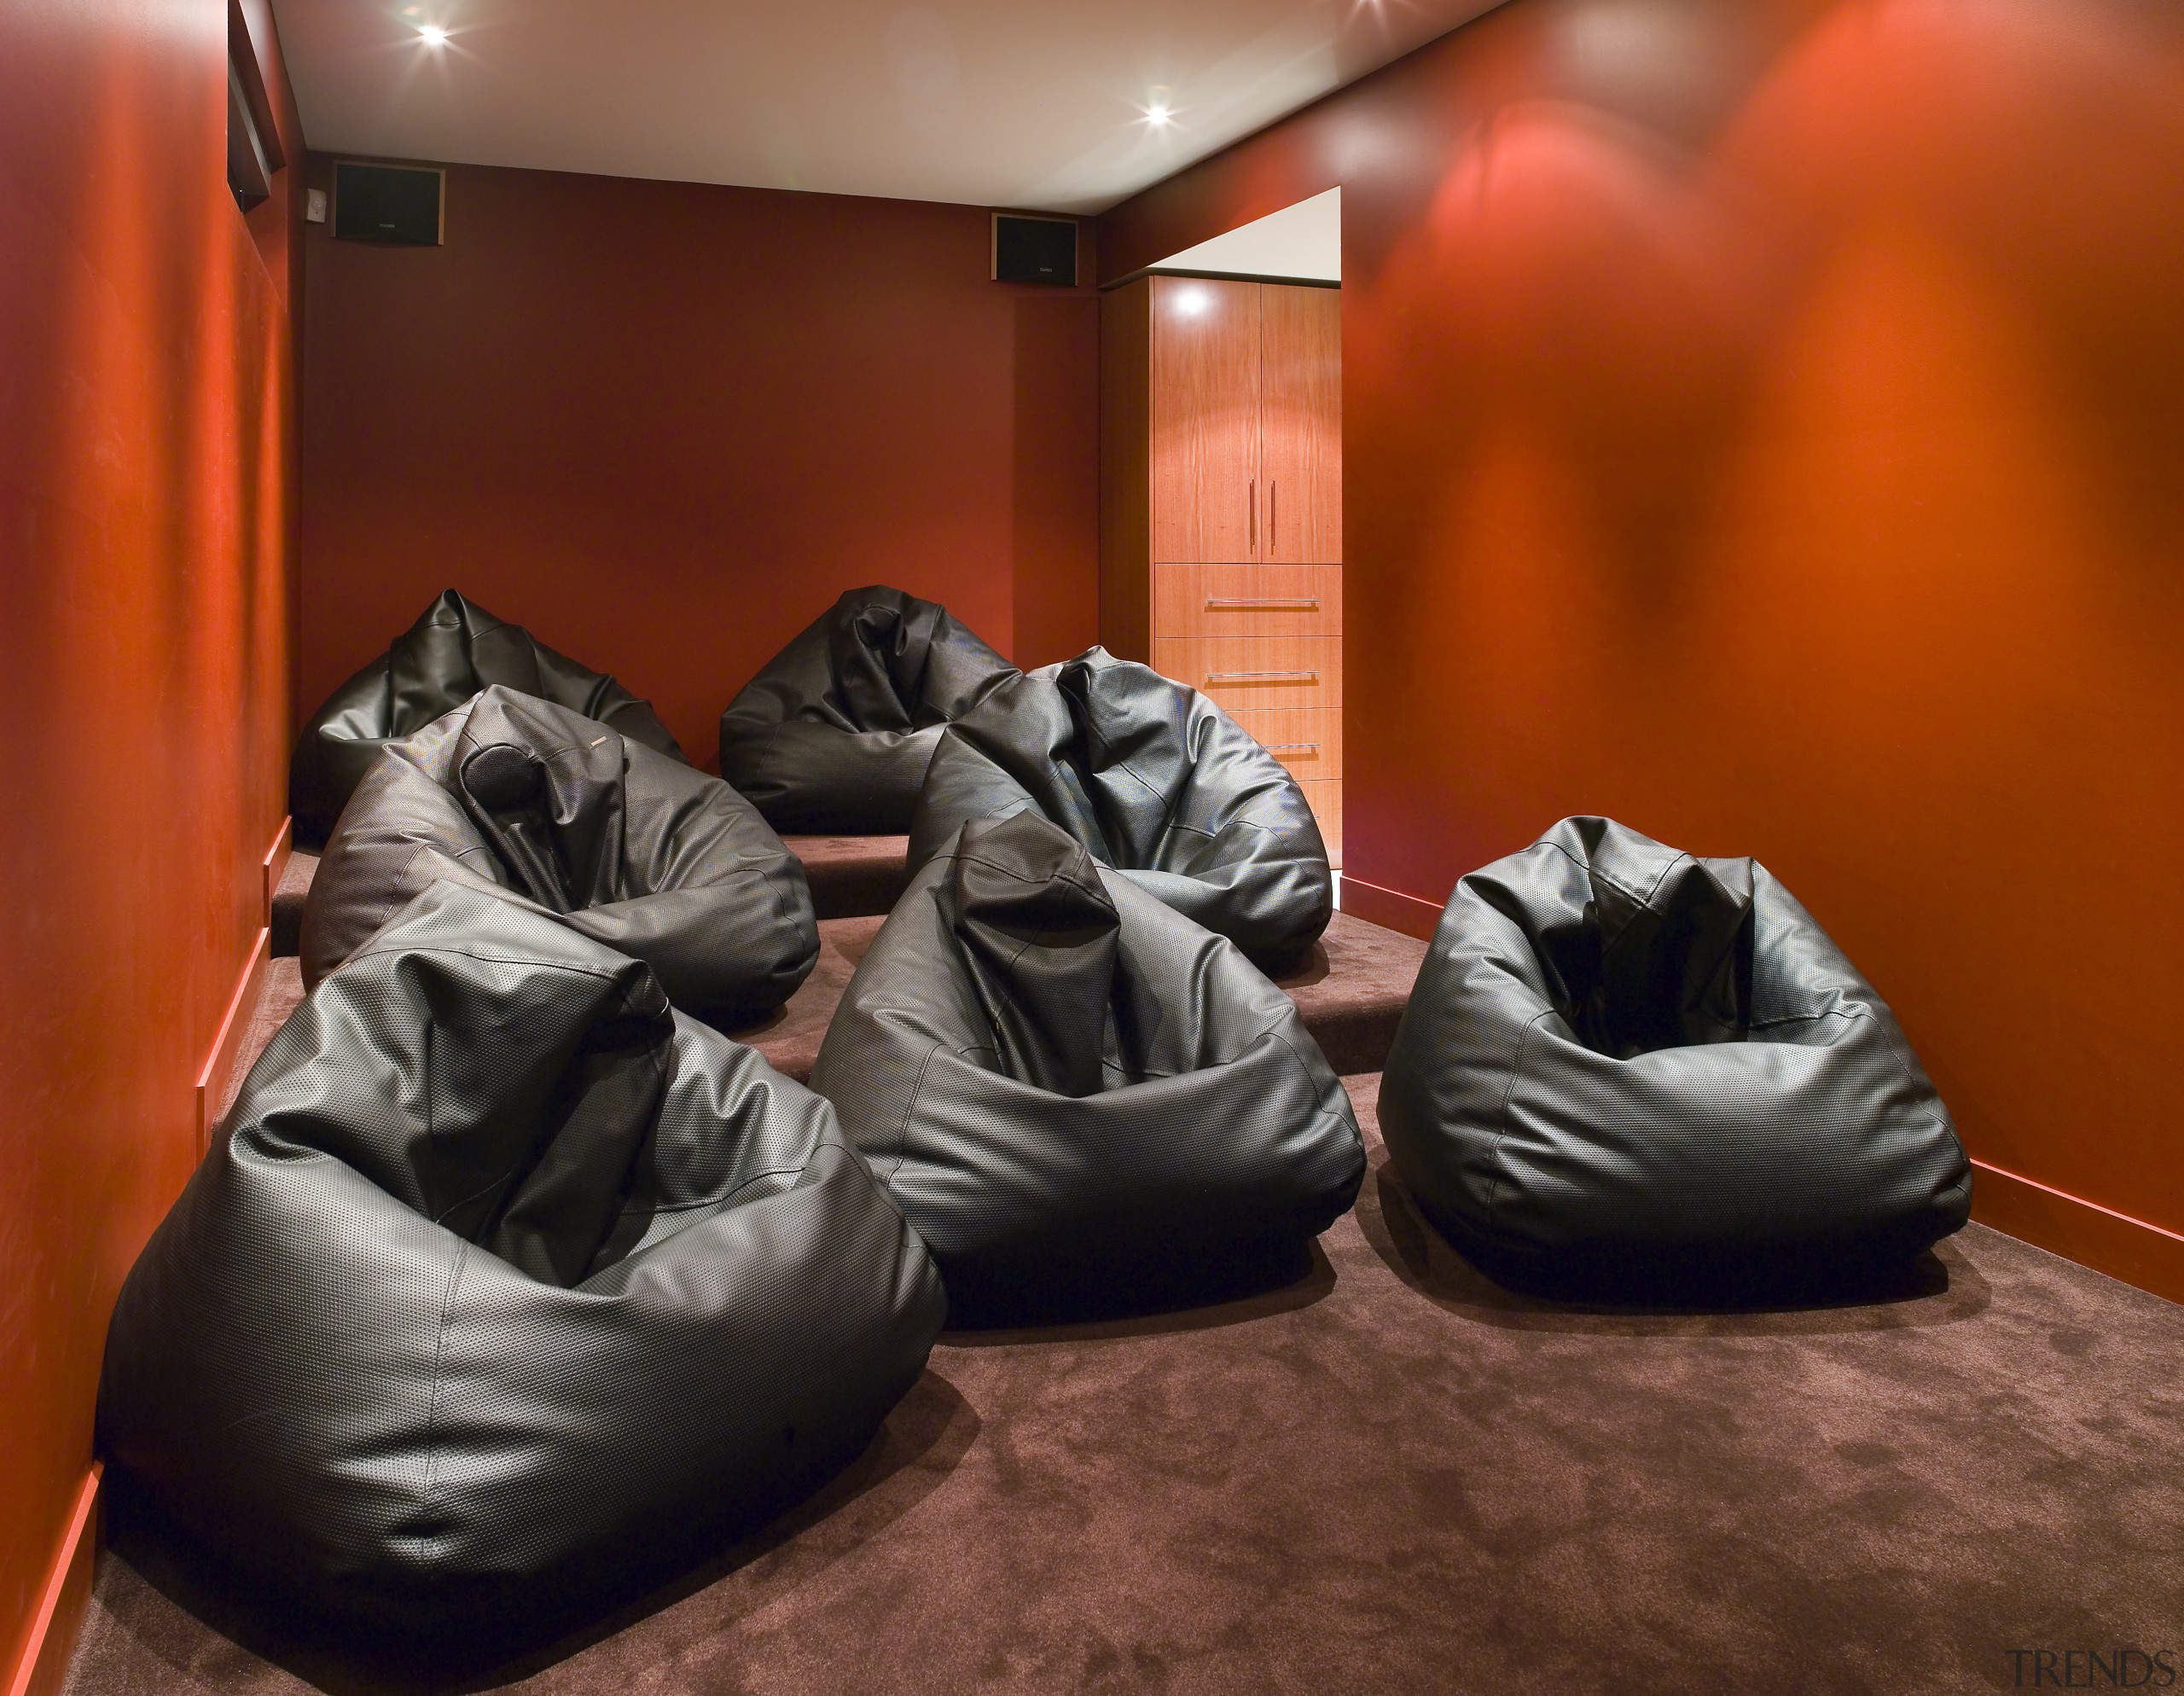 A view of an home theatre system witch couch, furniture, room, red